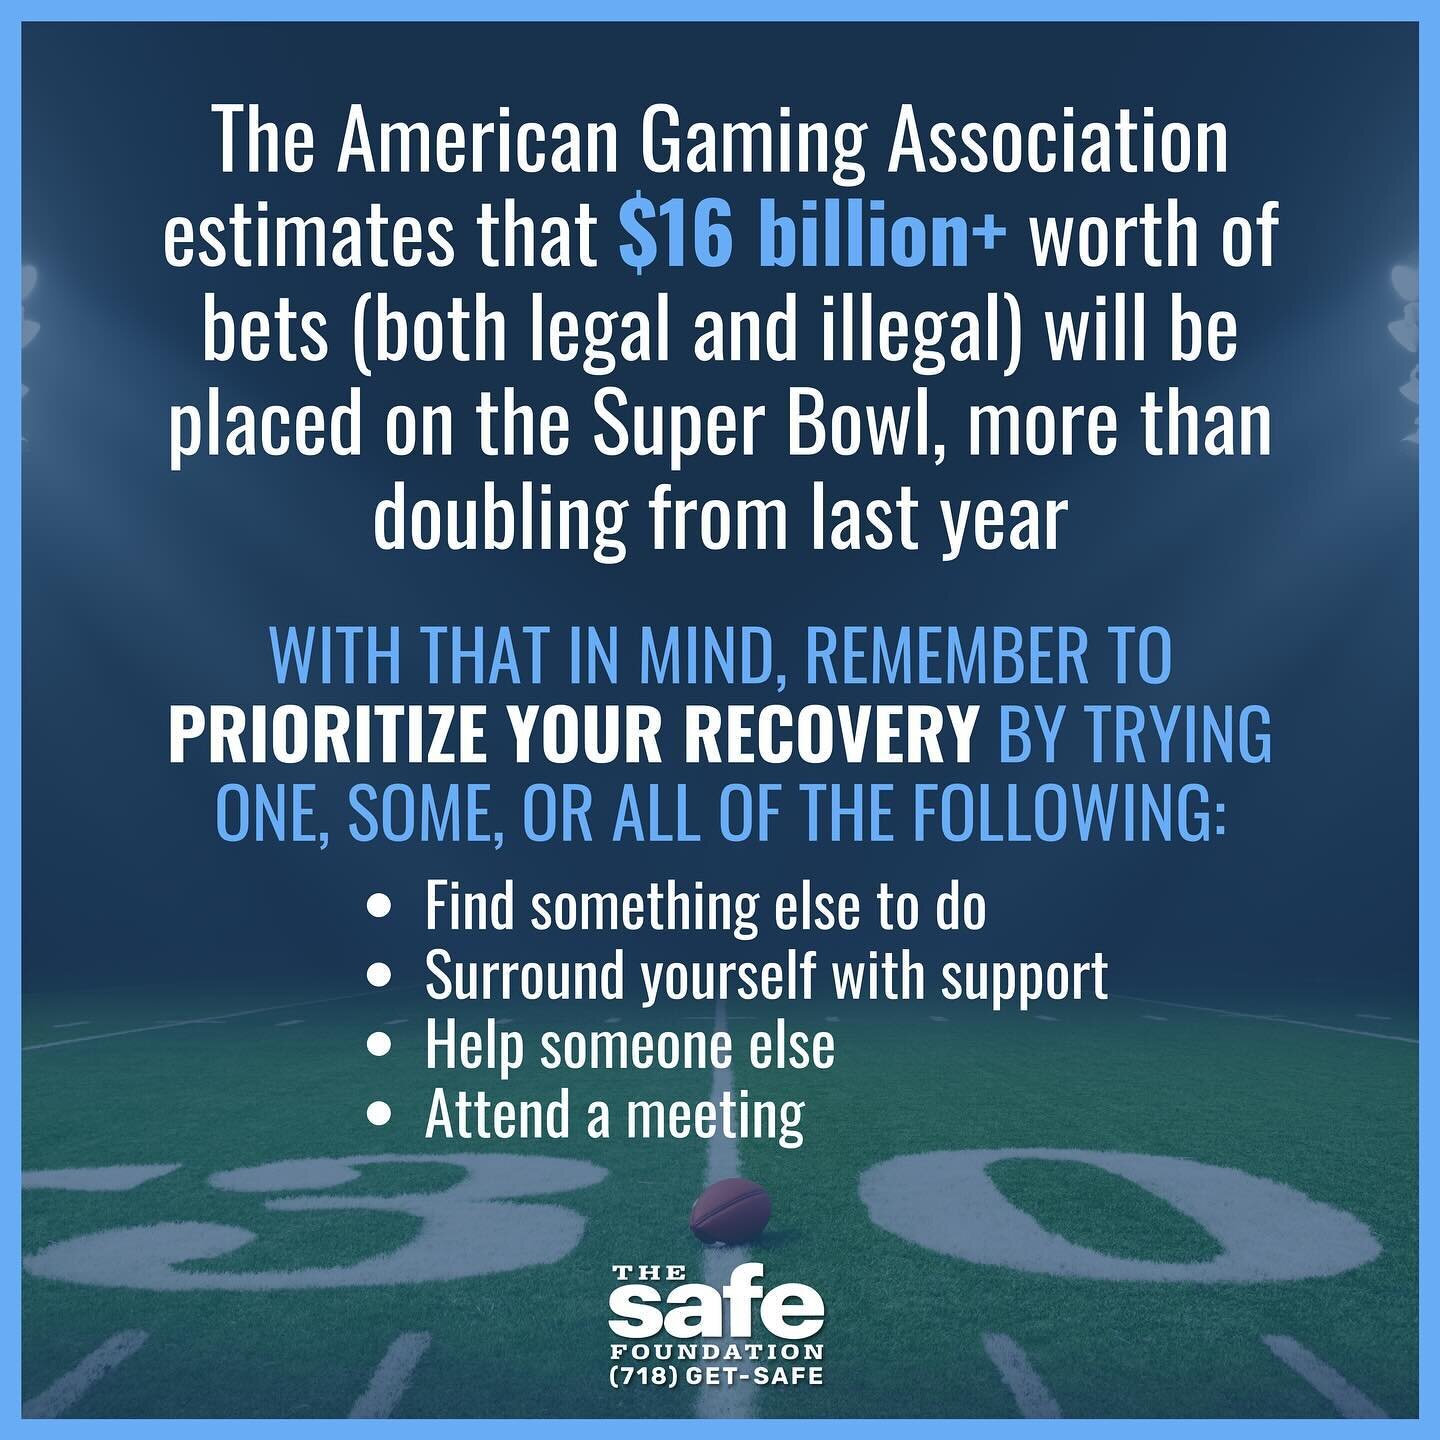 Super Bowl weekend can be tough for problem gamblers in recovery. With temptation and the accessibility of gambling higher than ever, do what you can to protect and prioritize your recovery!

#addiction #addictionrecovery #addictiontherapist #problem